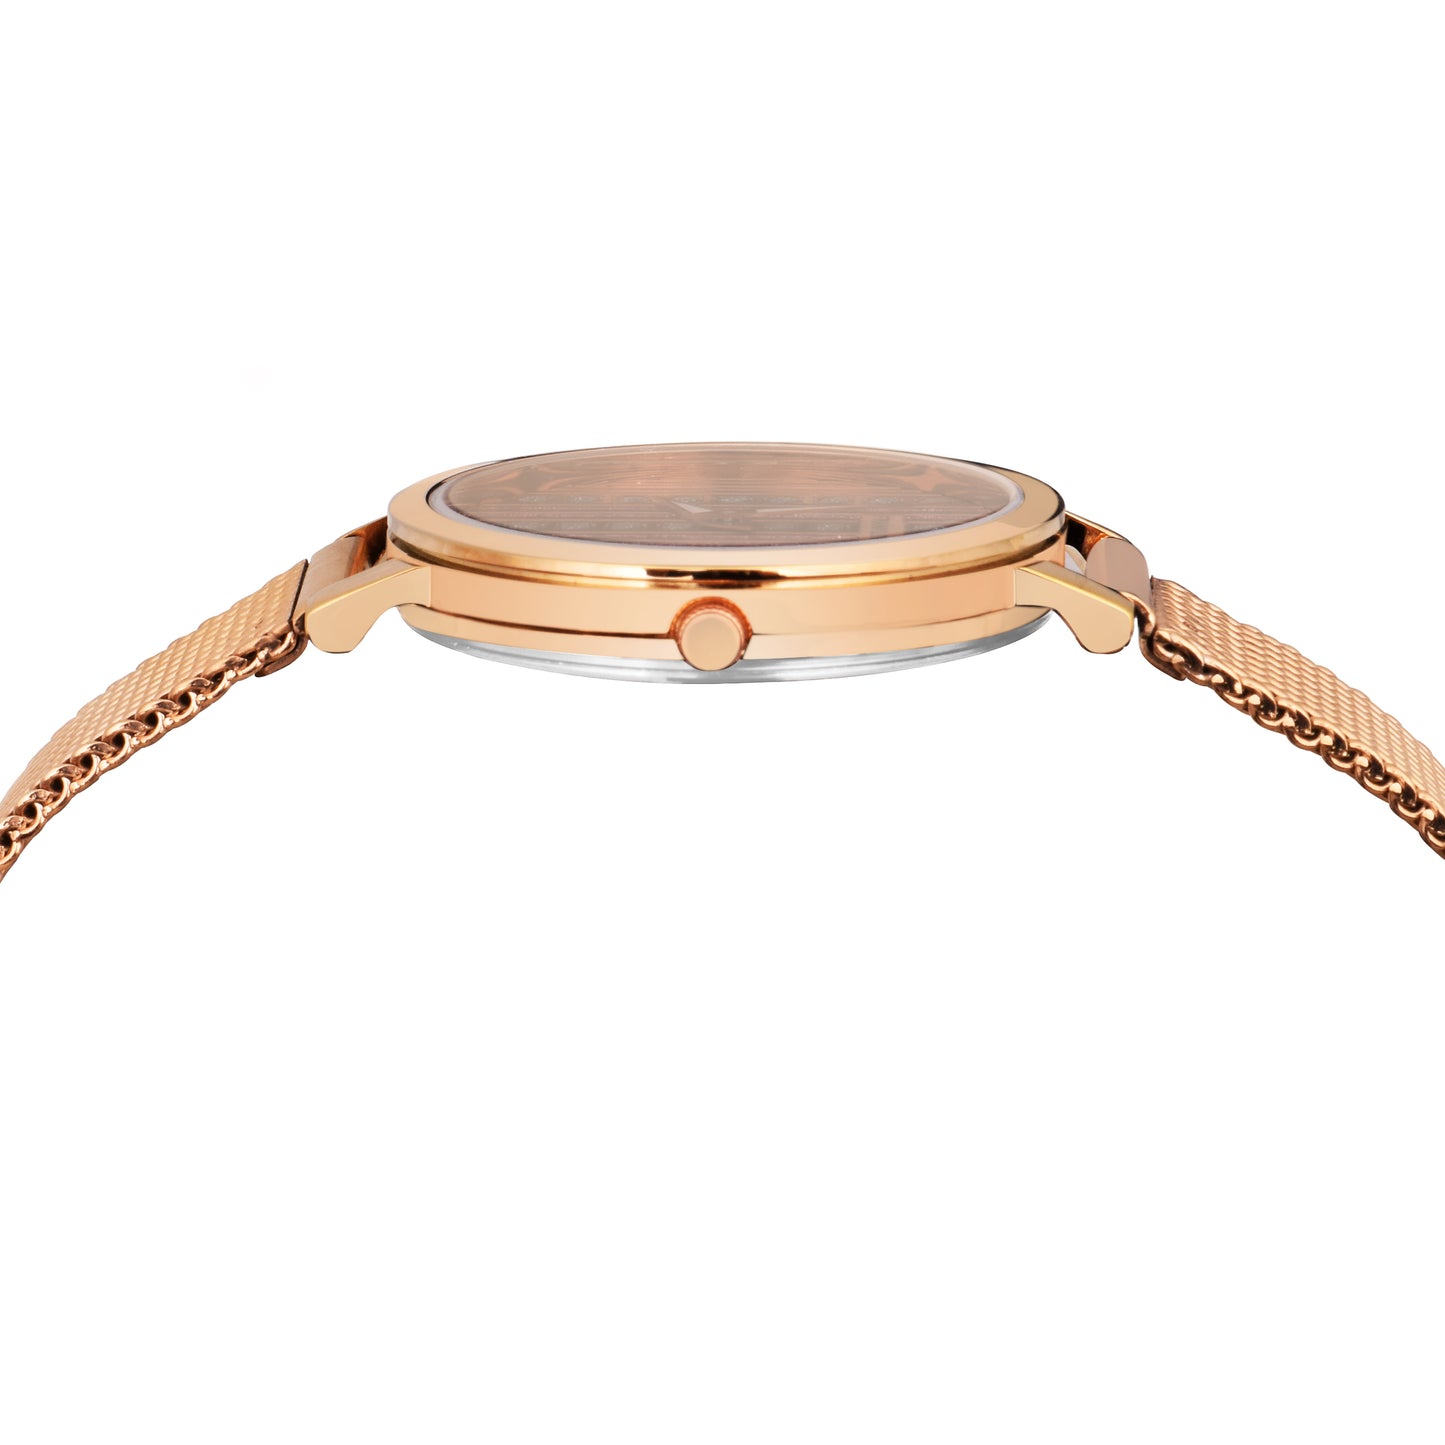 CINDRELLA -FRANKLORD- Gold- Blush Bloom Watch For Women F-131 RRLL A